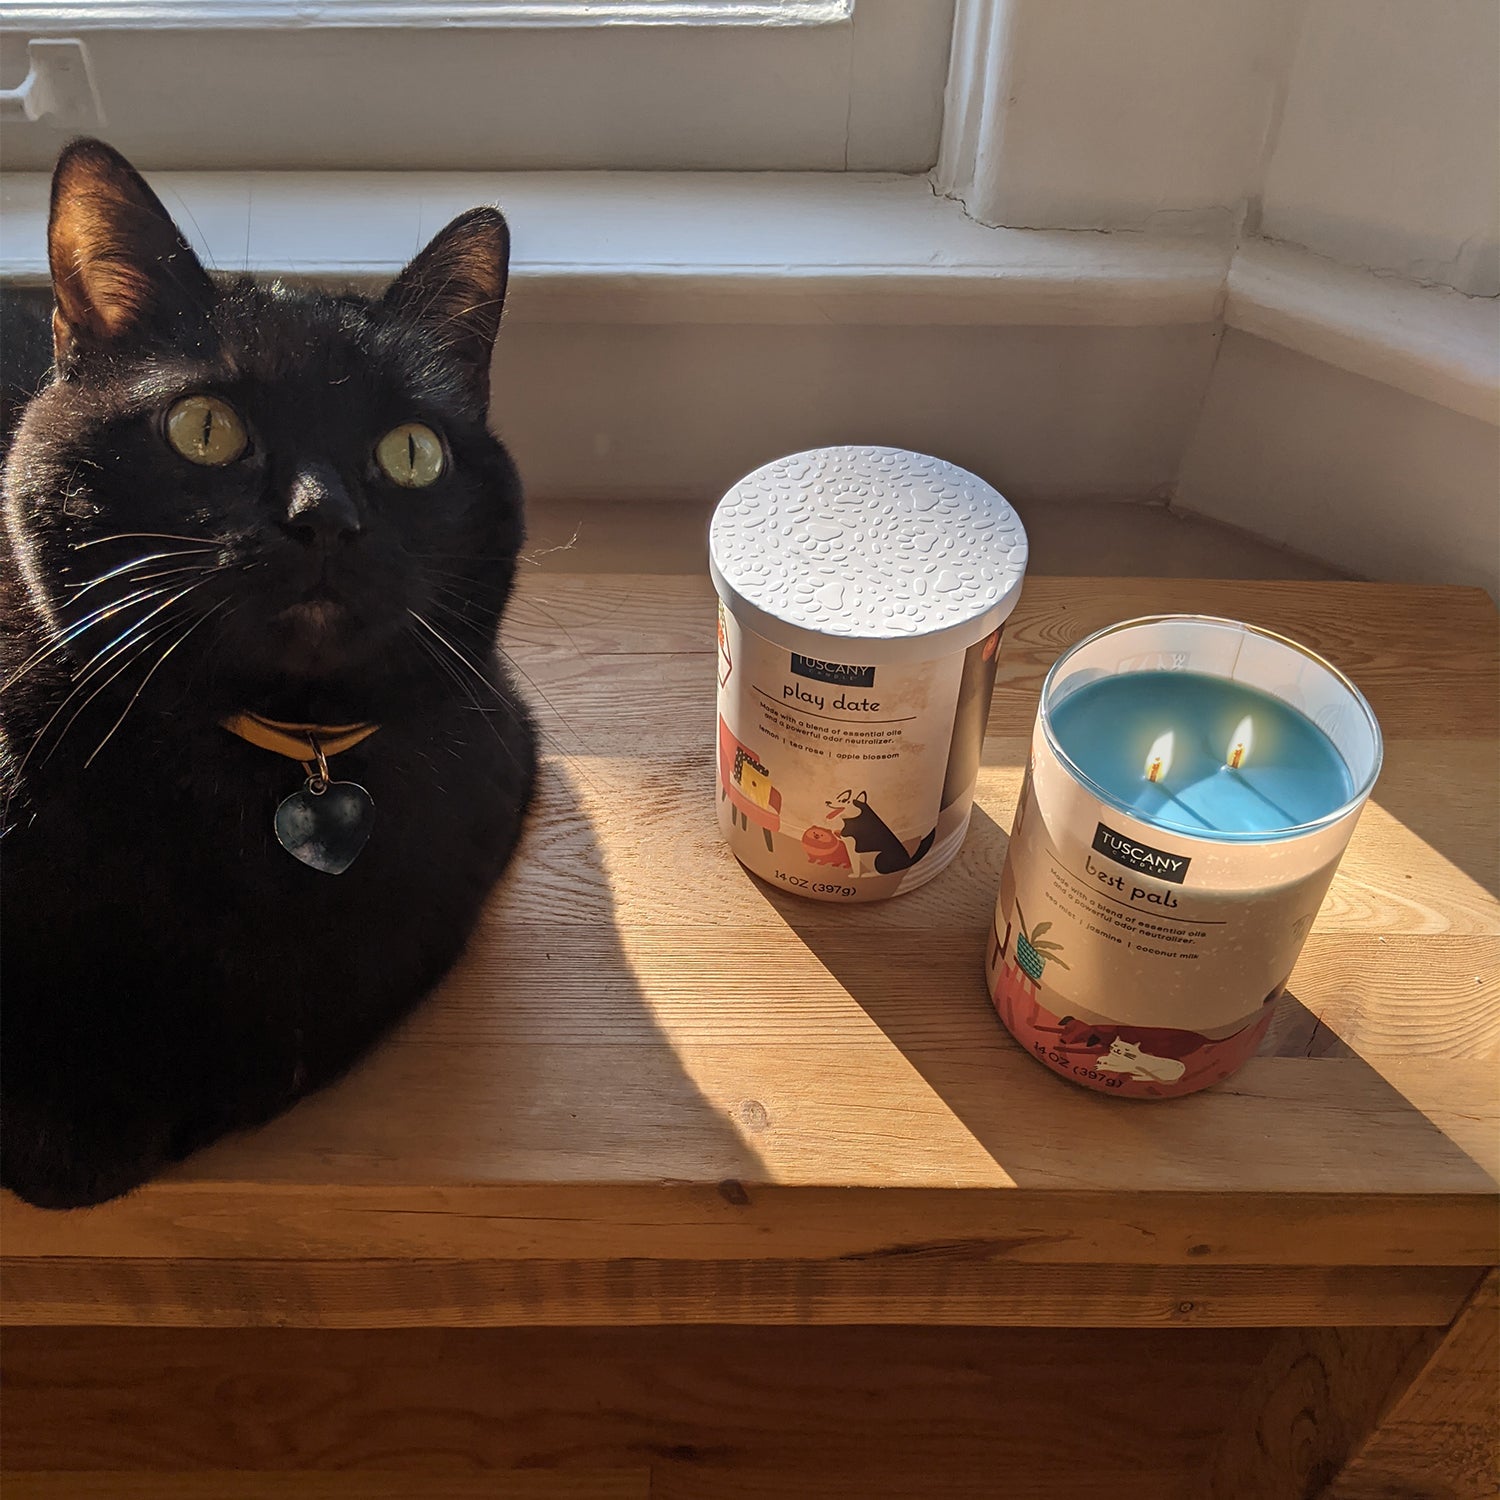 A black cat sits on a window sill next to a Tuscany Candle Play Date Scented Jar Candle (14 oz) – Pet Odor Control Collection, combating pet odors in a cozy home setting.